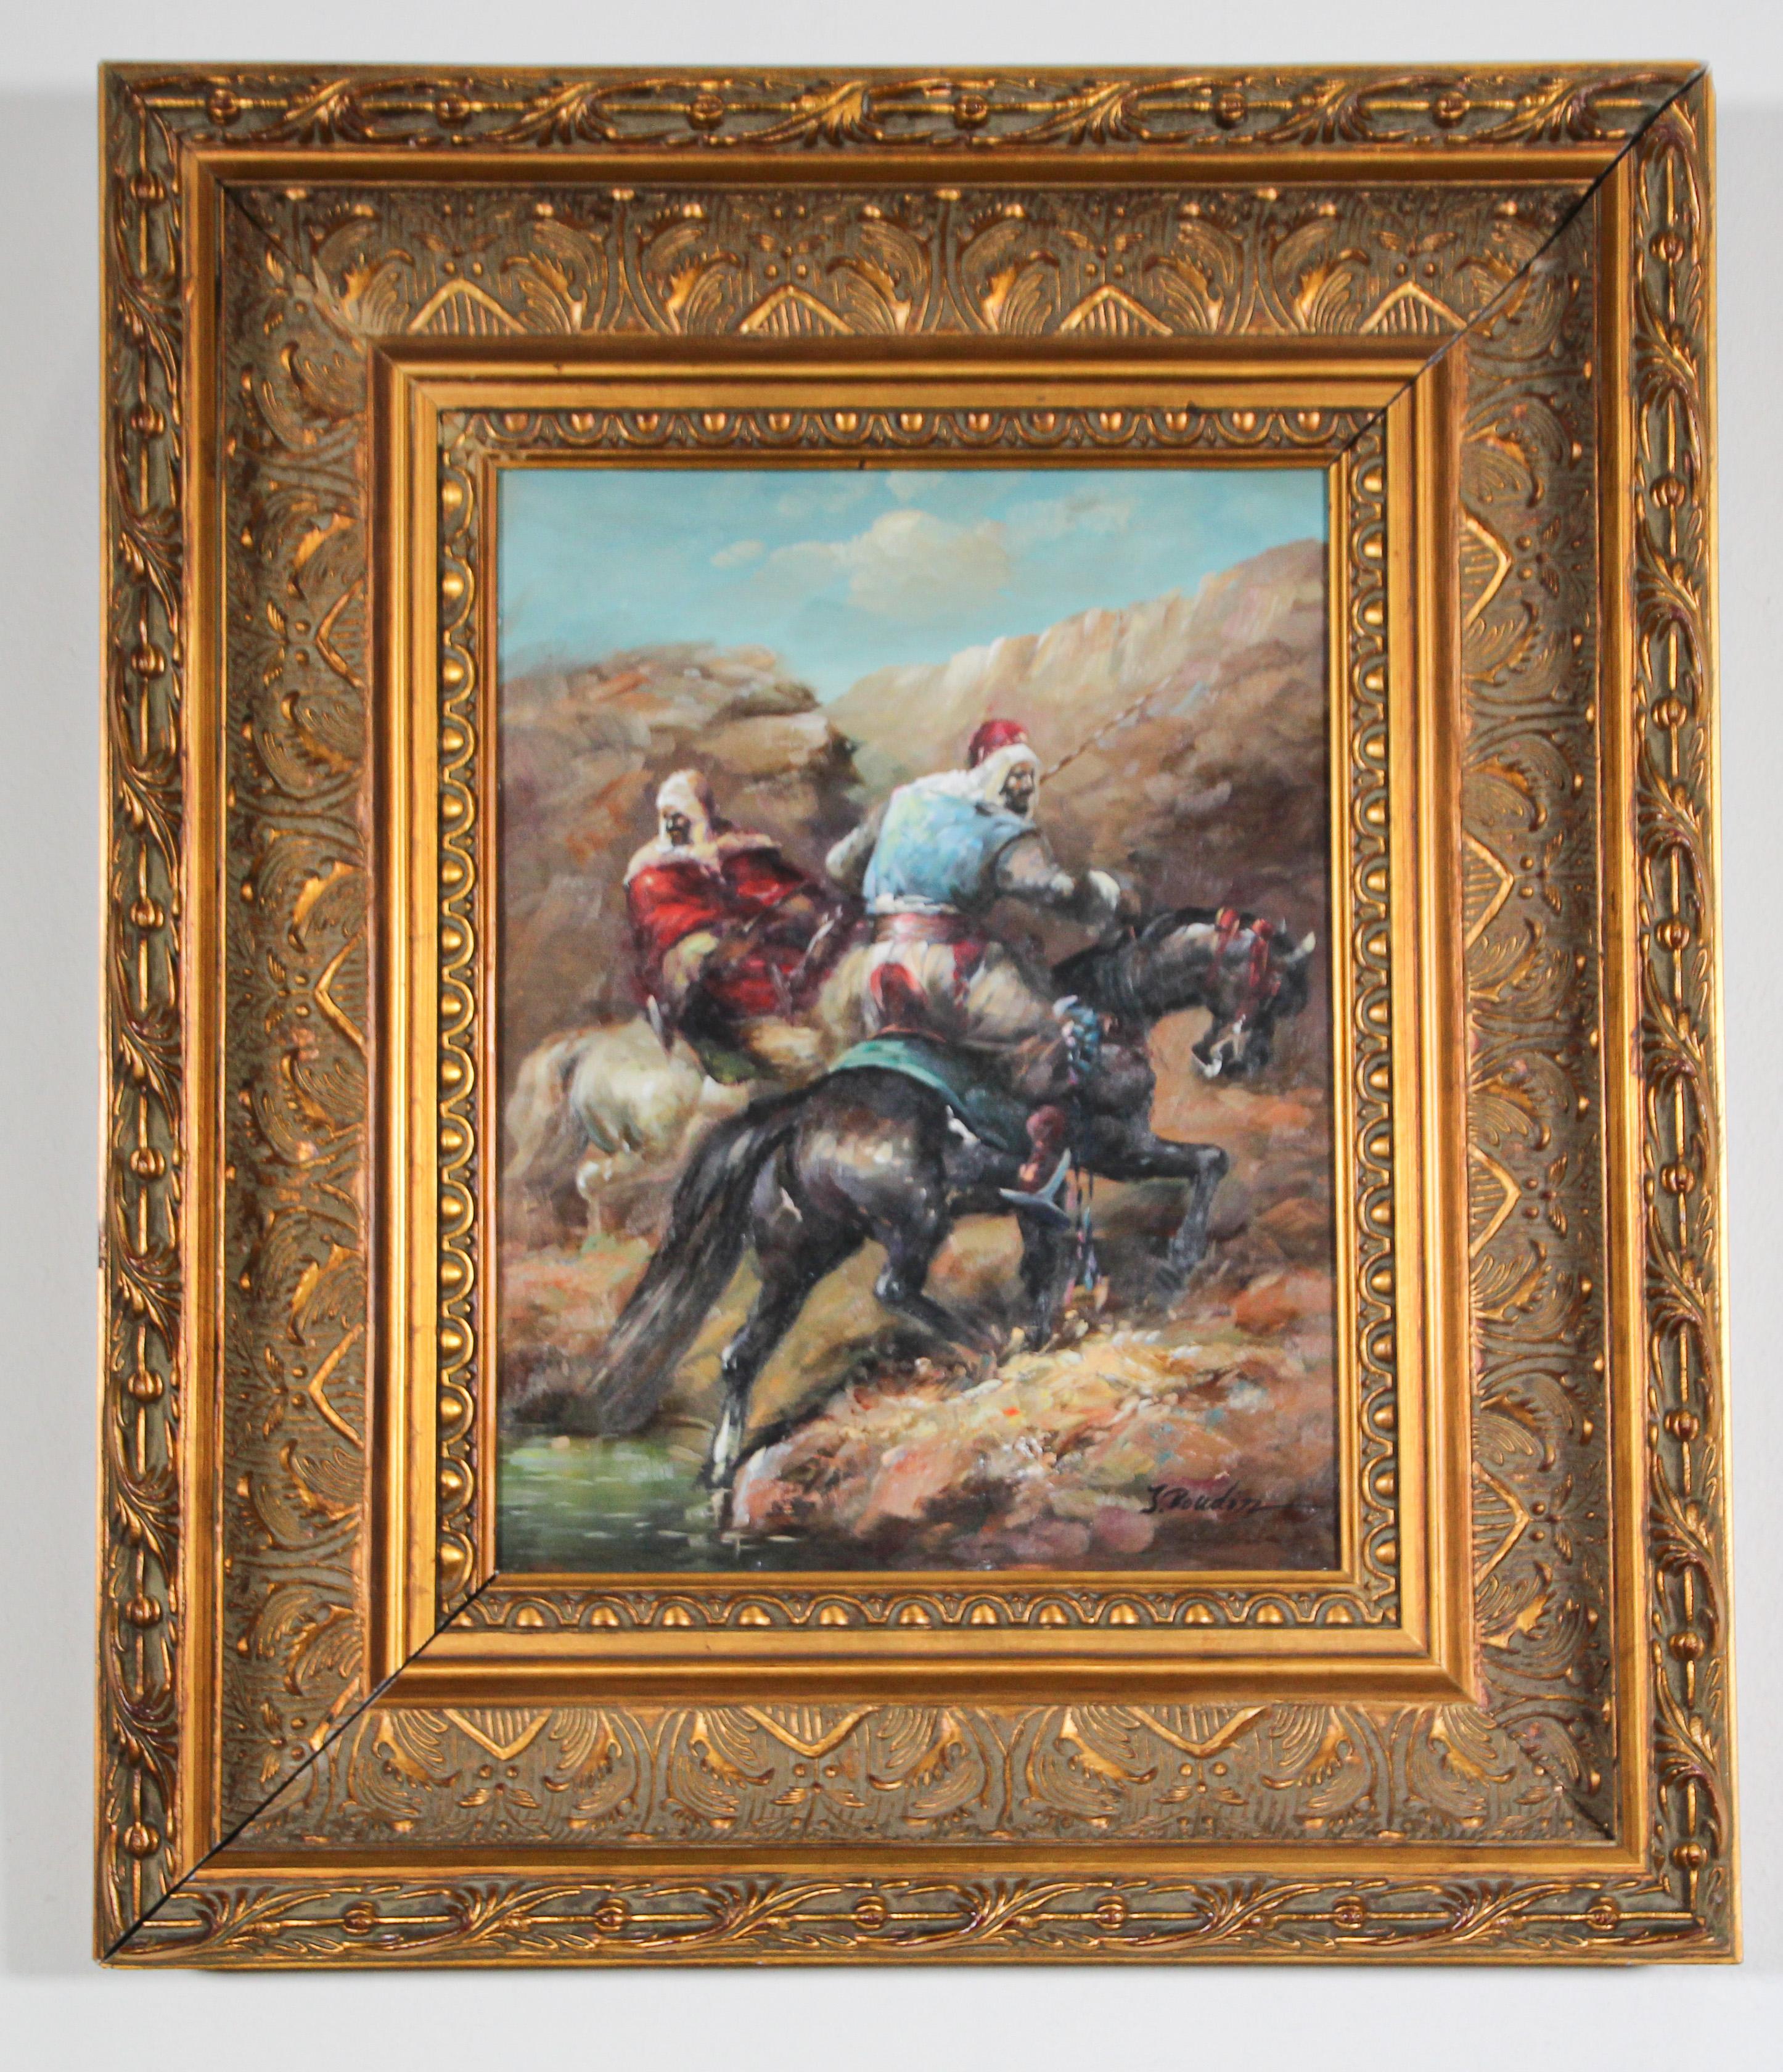 Framed Moorish orientalist oil on wood painting.
19th century Moroccan men riding on horses.
Contemporary French oil on wood orientalist painting.
Wooden frame
Signed on the right corner after Eugene Boudin.
Measures: Frame 22